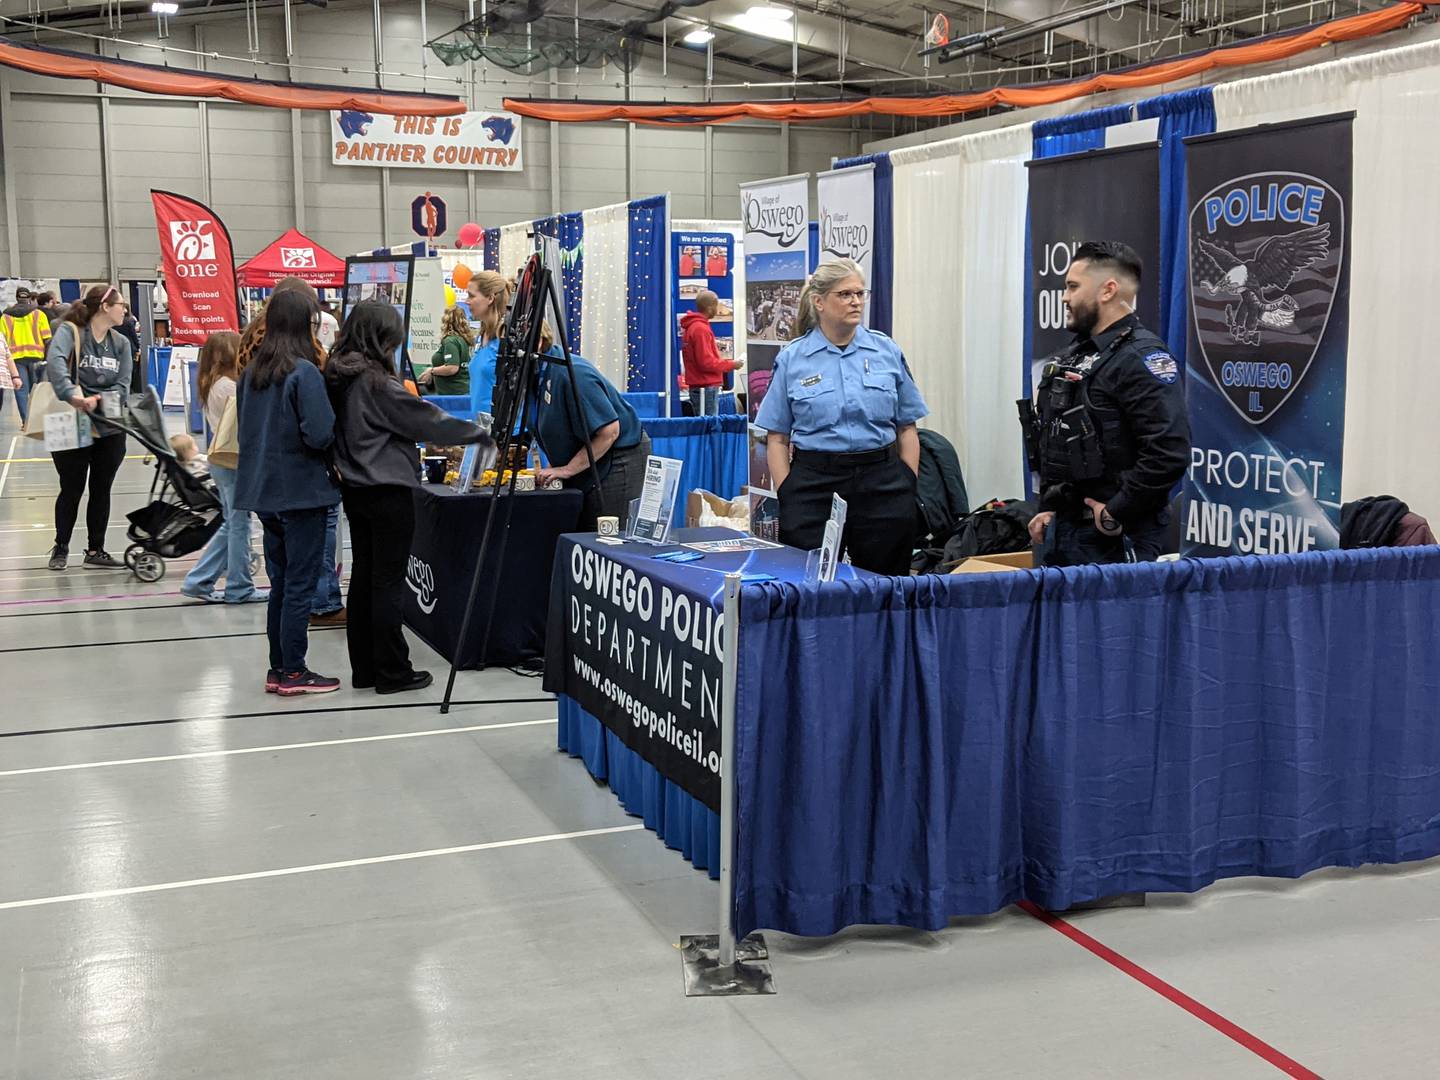 The village of Oswego and the Oswego Police Department had booths at the Oswego Hometown Expo, held Feb. 24 at Oswego High School.